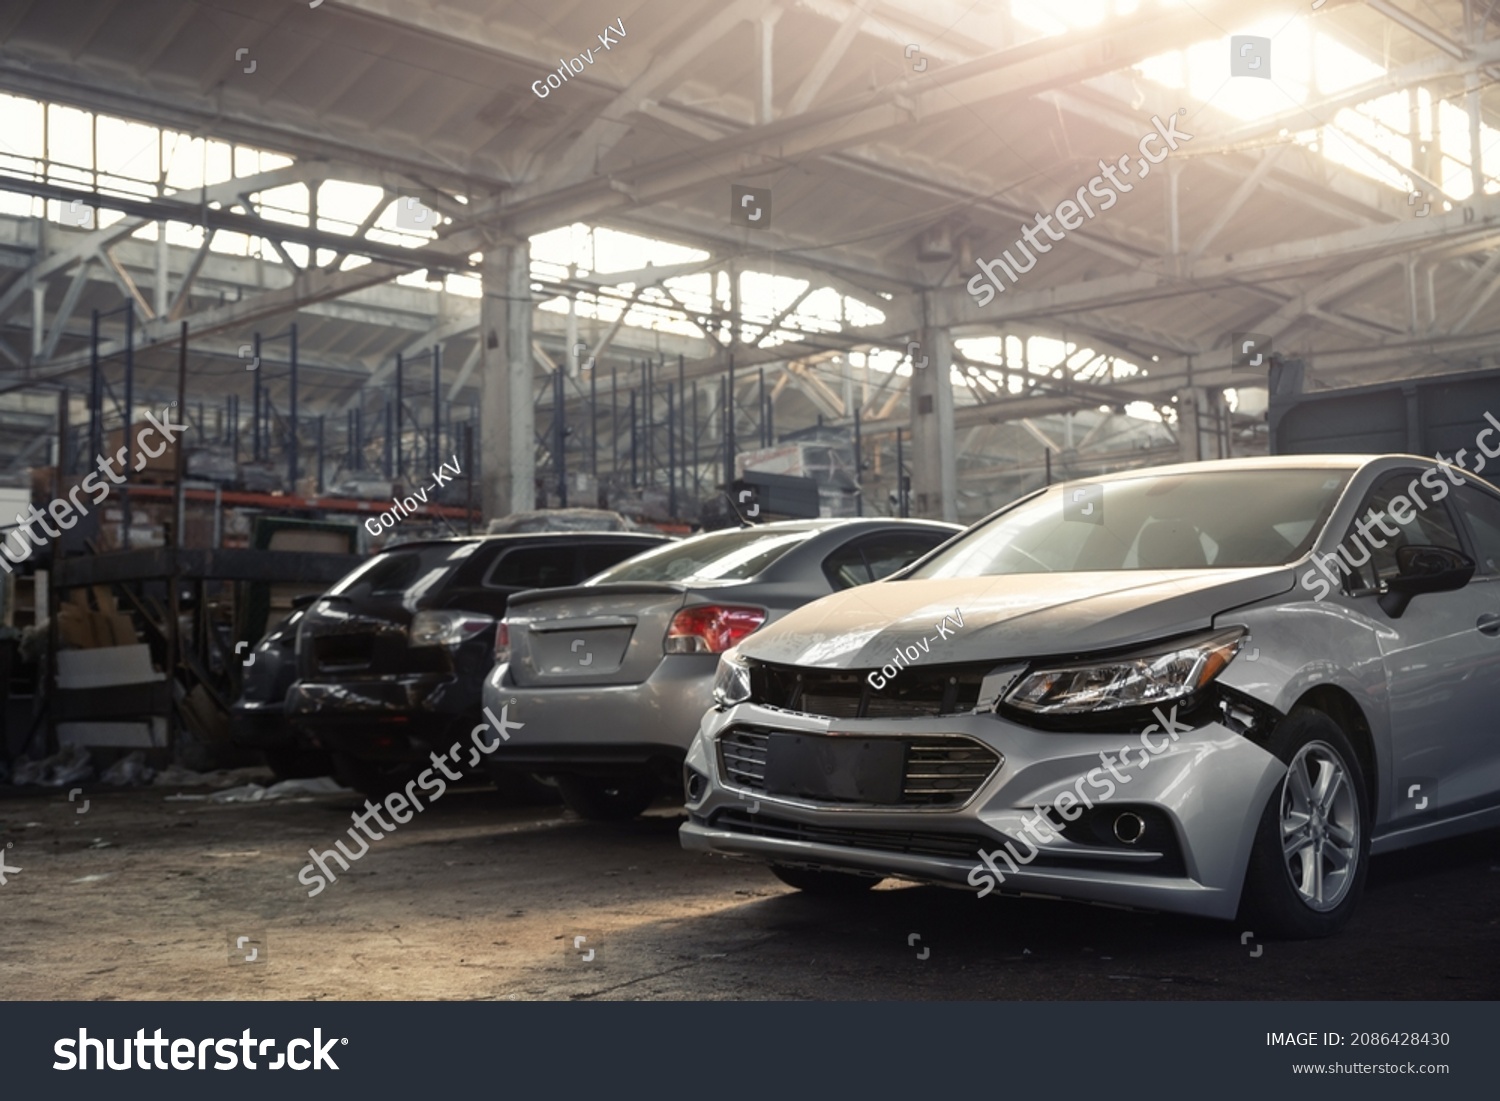 Many unknown altered wrecked car after traffic accident crash at restore service maintenance station garage indoor. Insurance salvage vehicle auction wholesale. Auto body wreck damage workshop center #2086428430